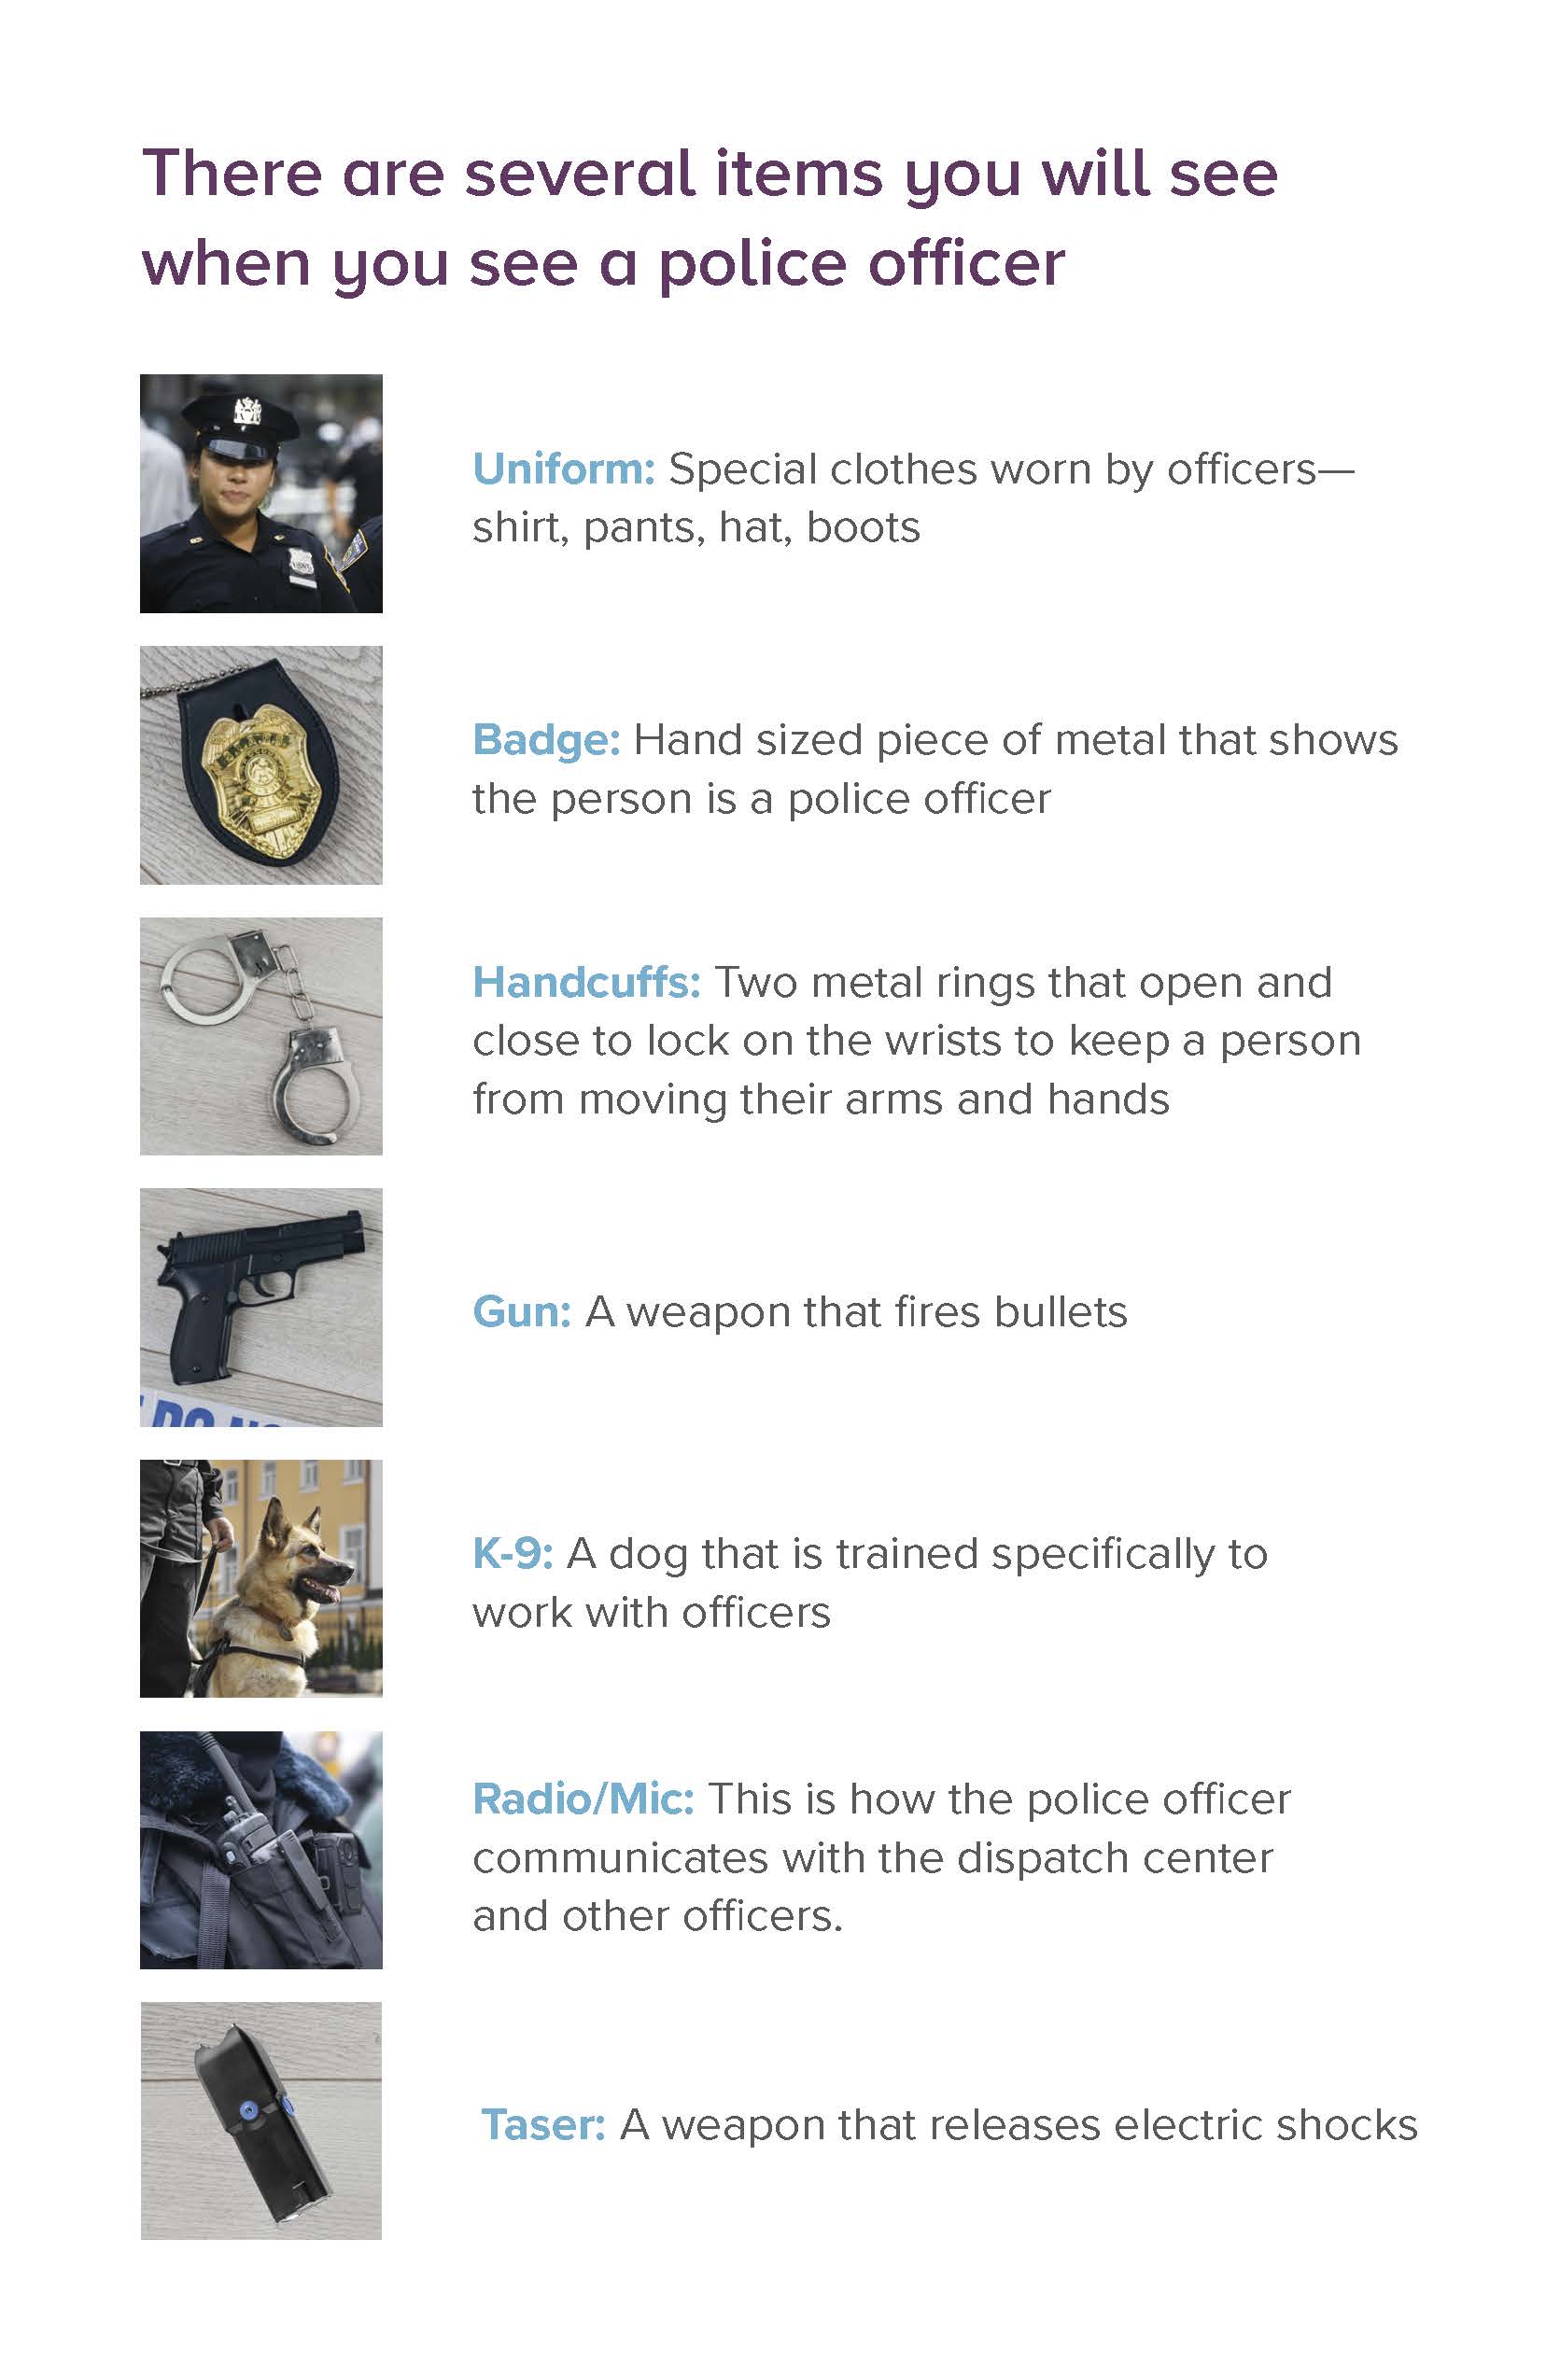 Items that are associated with a policy officer Uniform, Badge, Handcuffs, Gun K-9, Radio/MIC